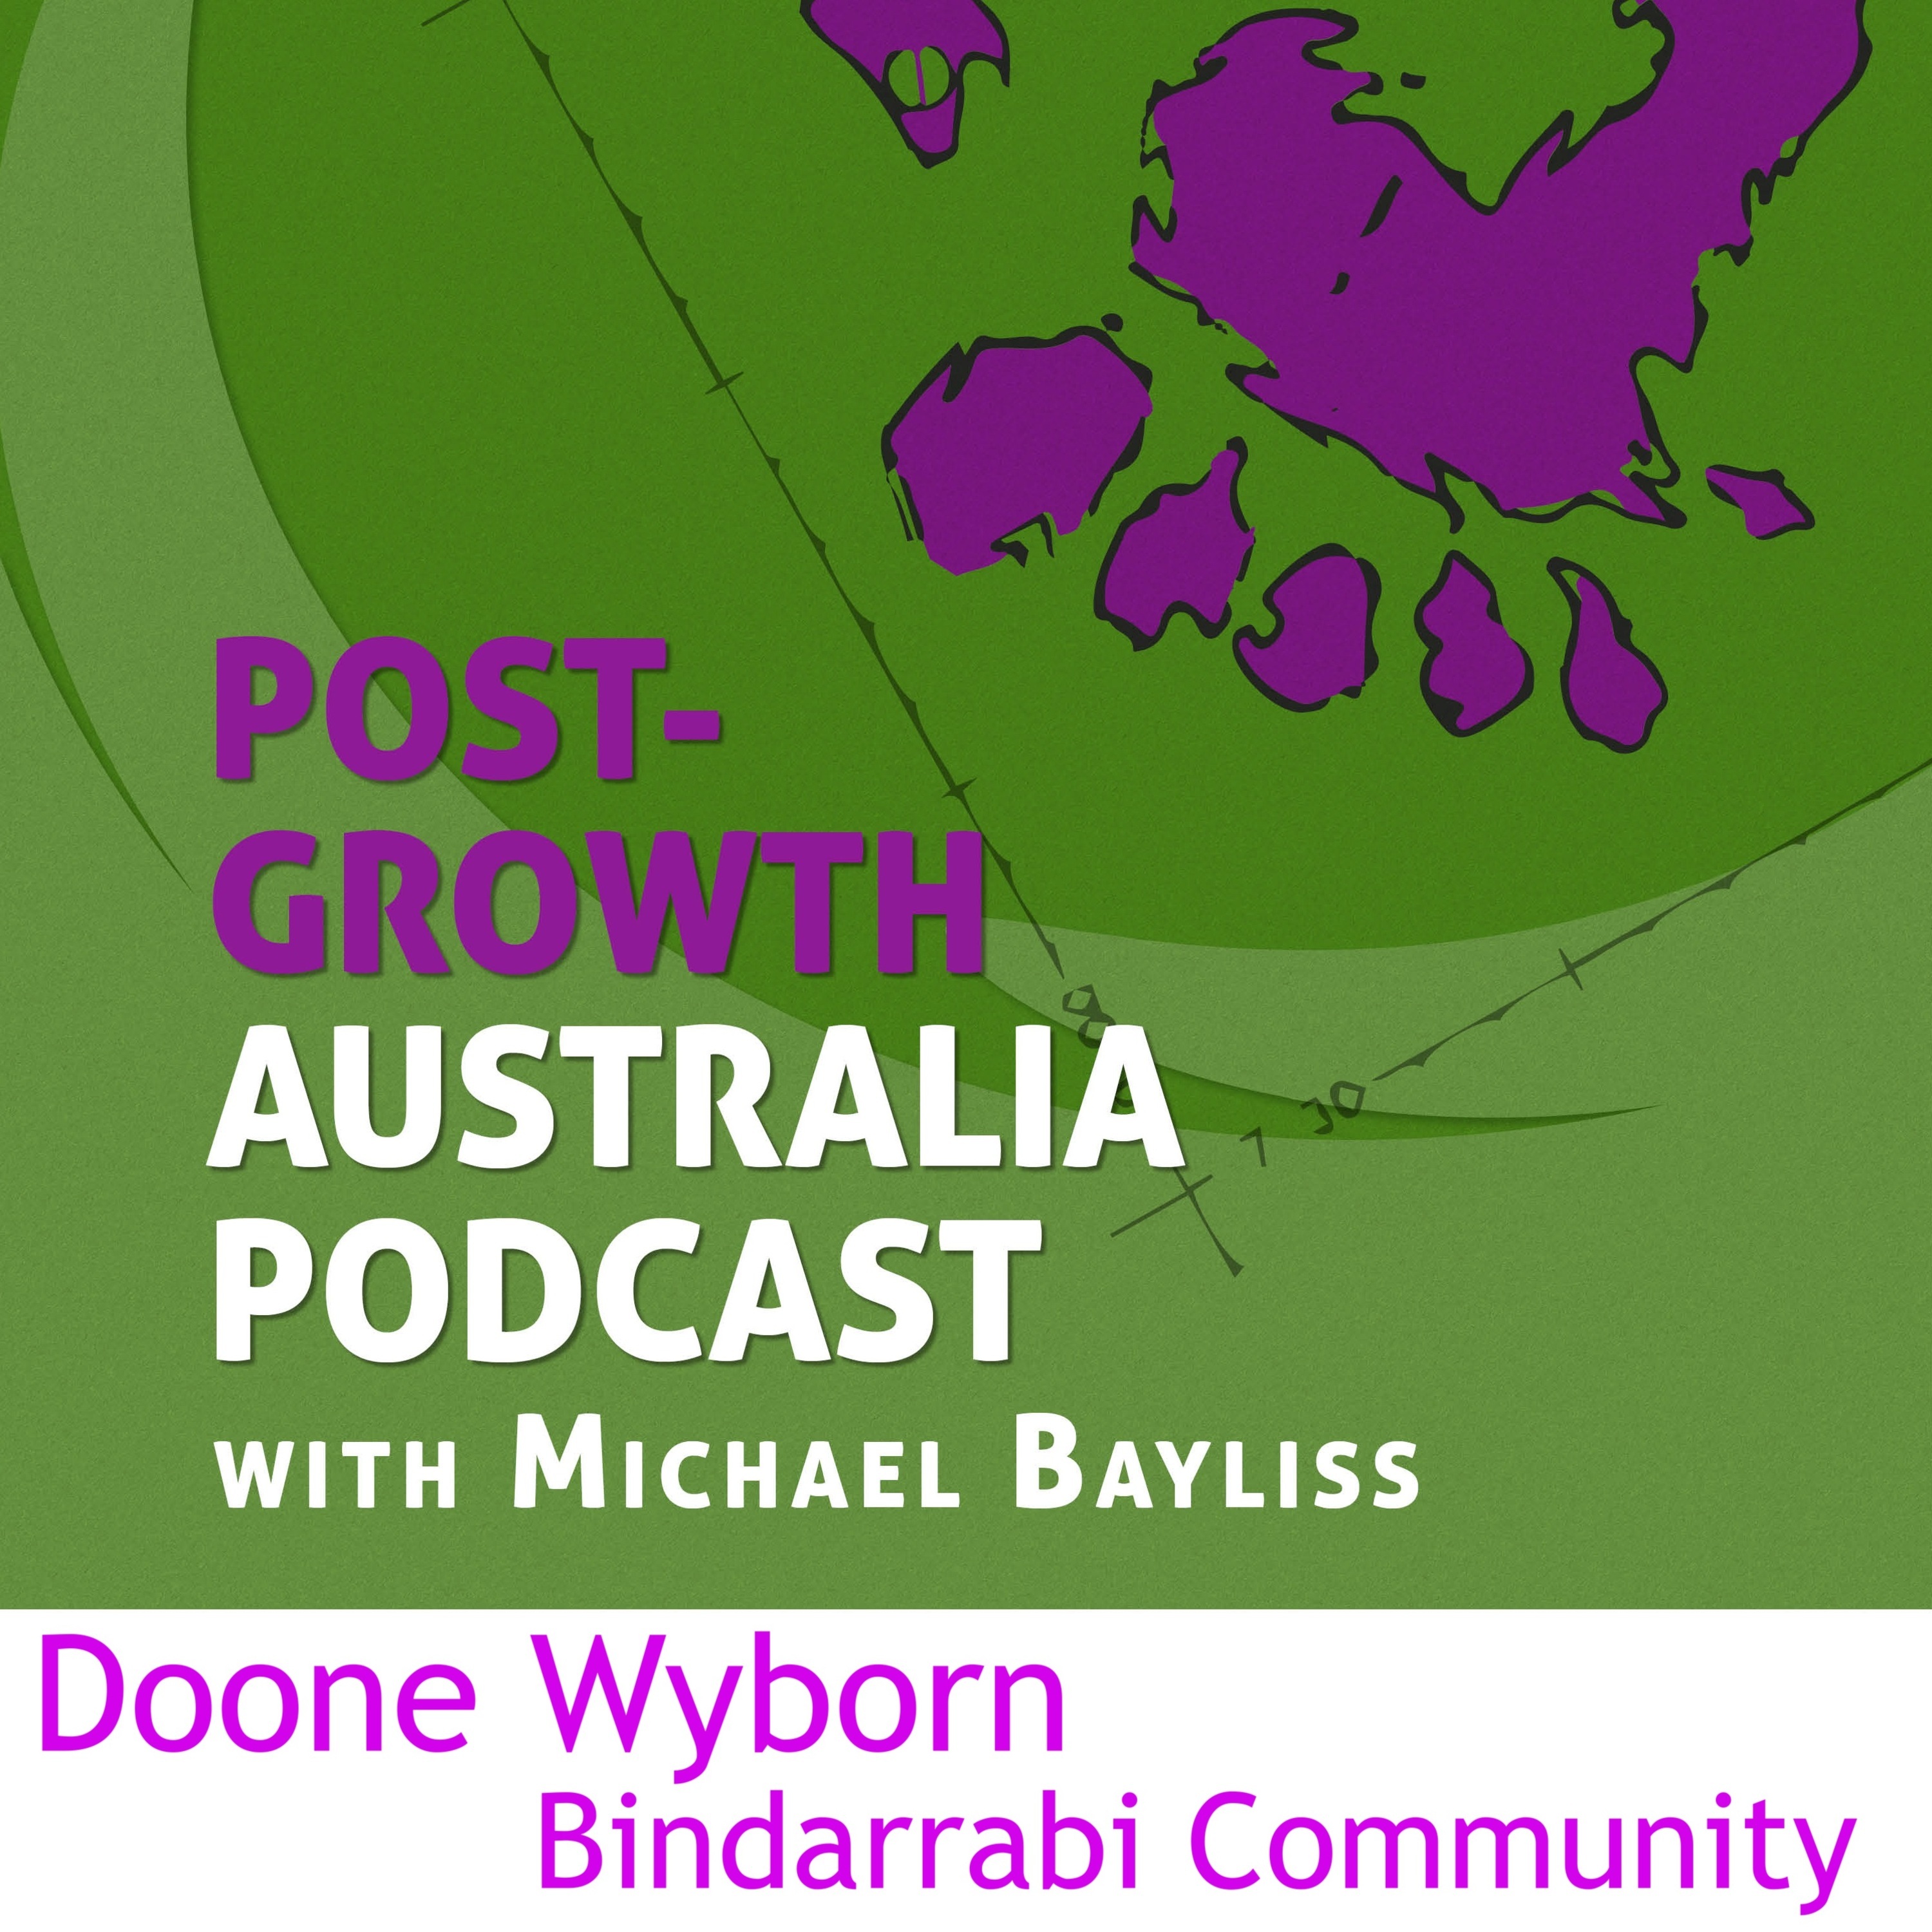 On The Road with Doone Wyborn and Bindarrabi Intentional Community